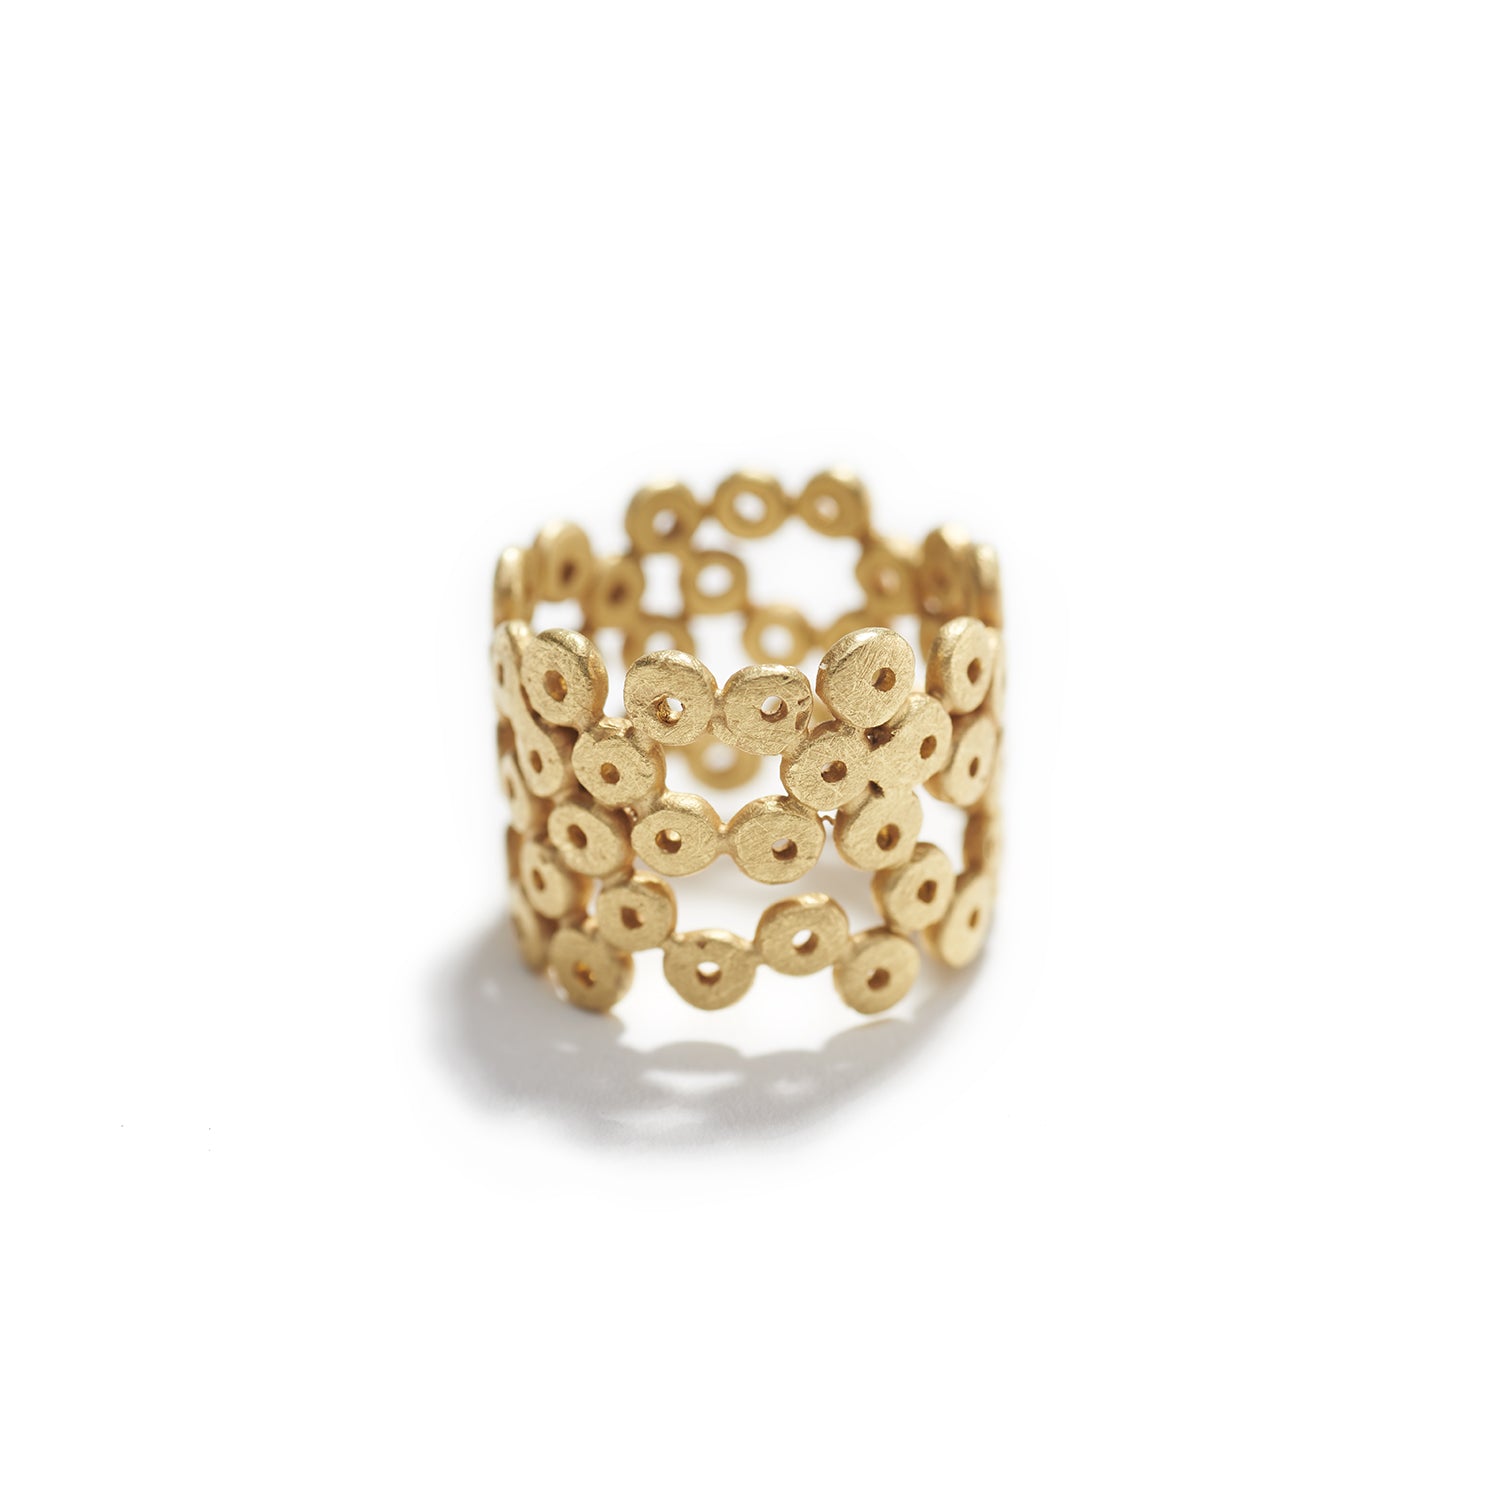 Golden Beads Ring Band